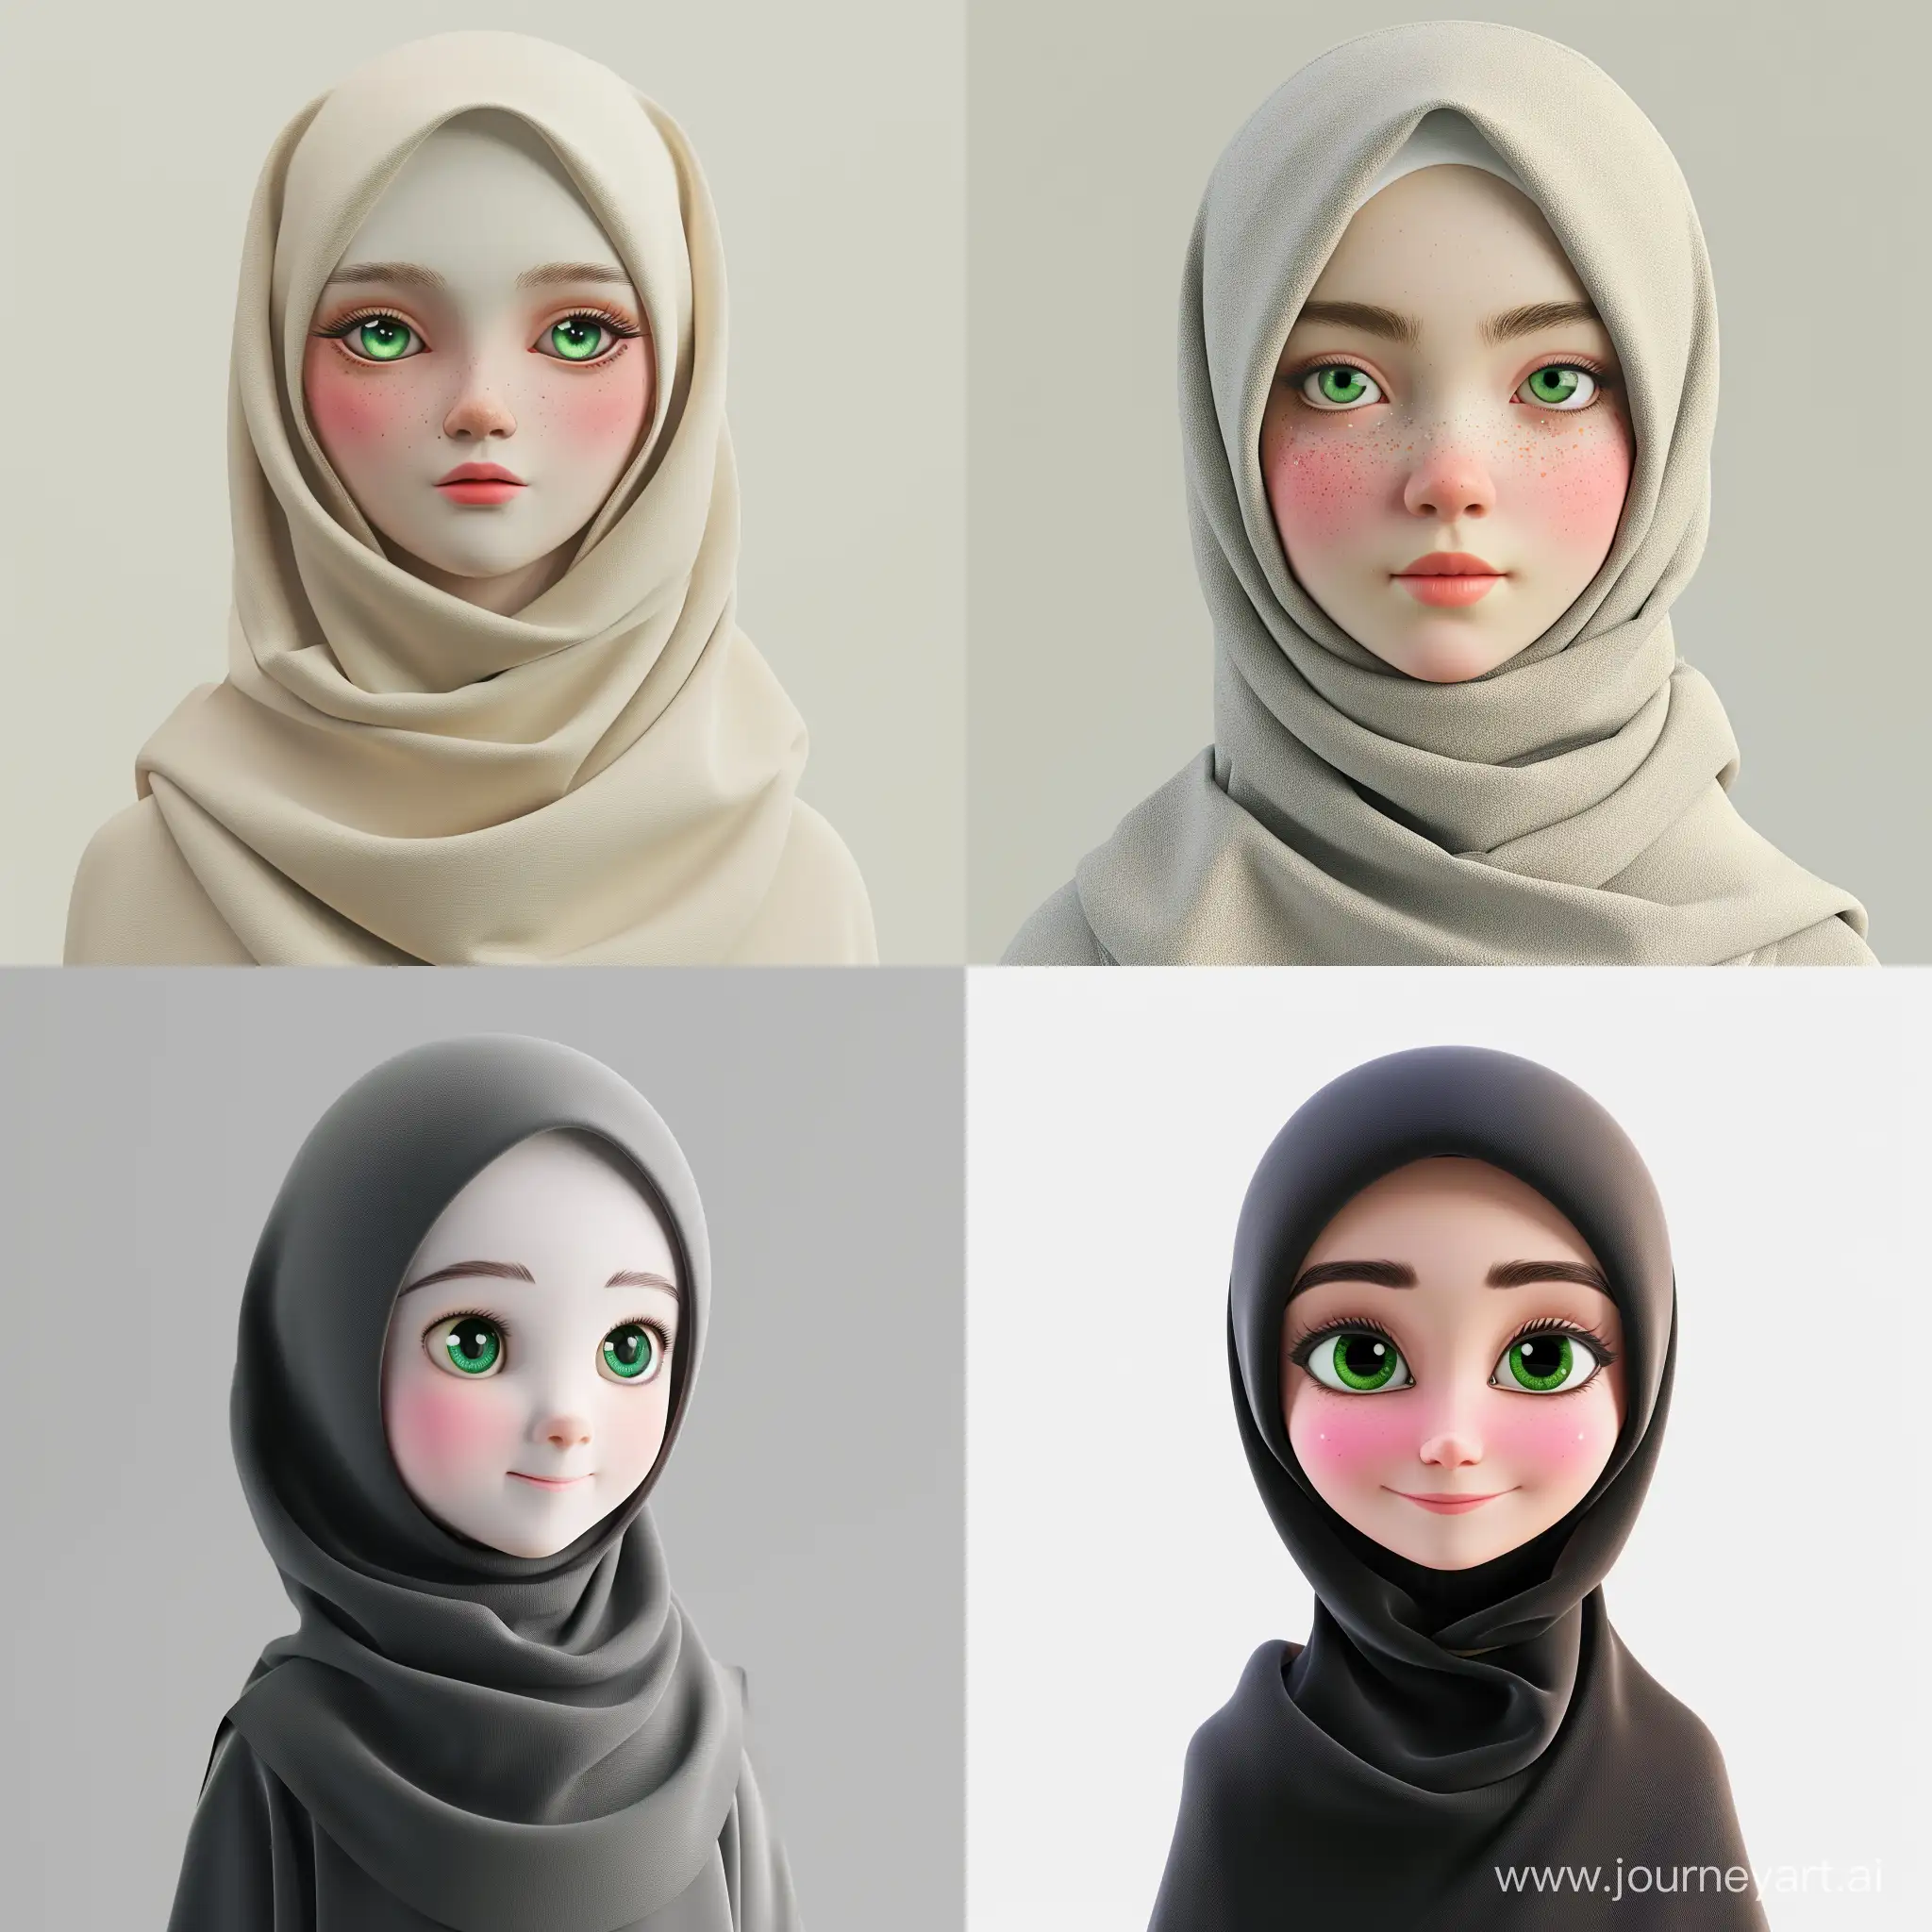 Beautiful-Young-Math-Teacher-with-Hijab-HD-Illustration-in-3D-Render